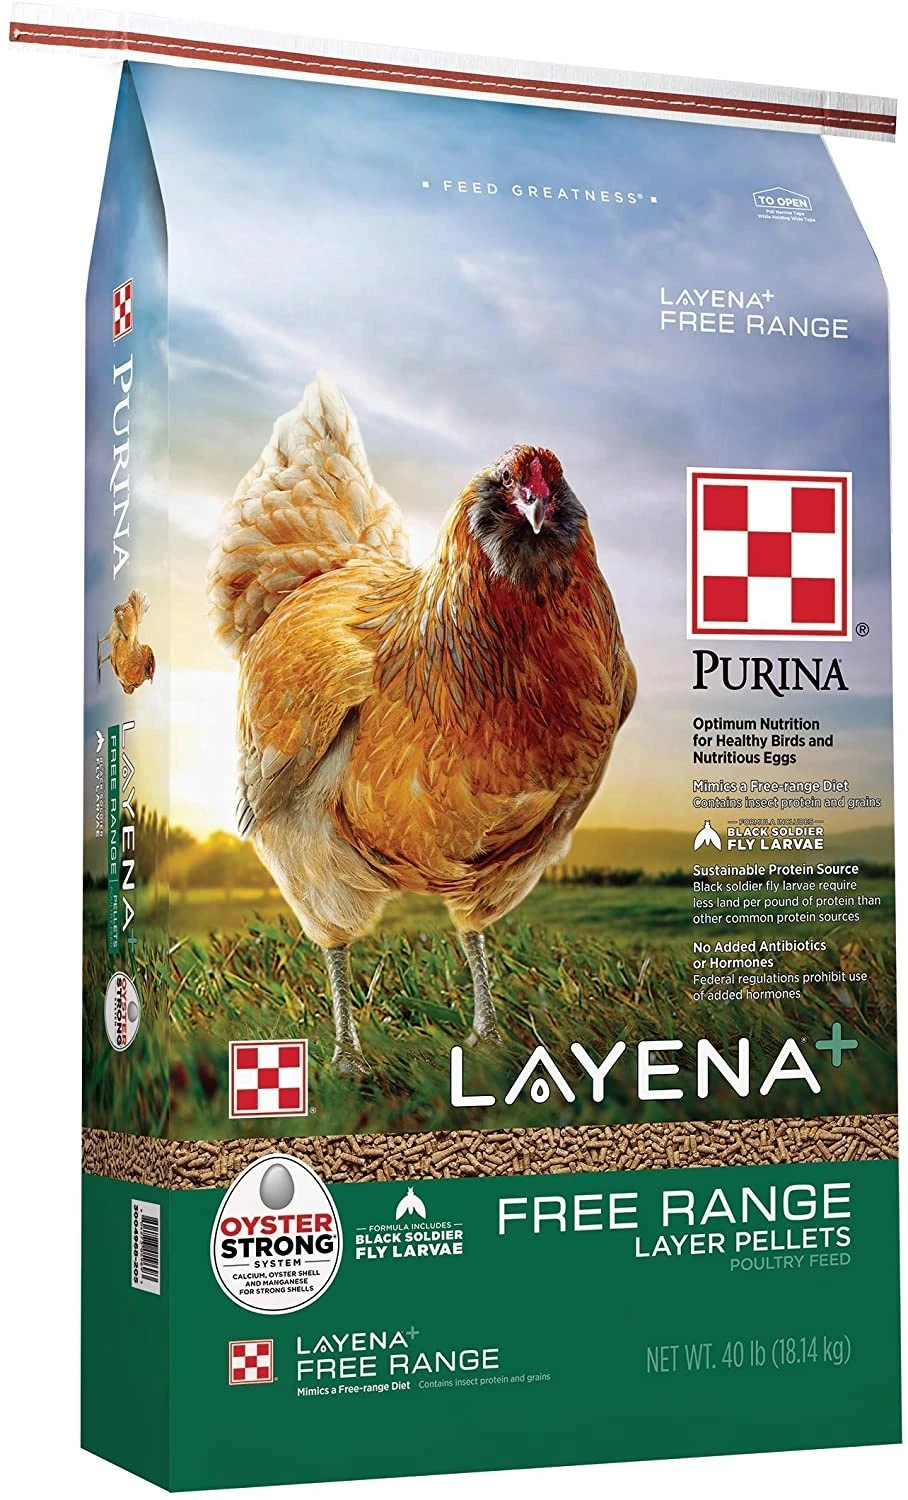 Organic Layer Feed Corn -Non-GMO Project Verified and Soy Free - Scratch and Peck Feeds bag for Chickens and Duck